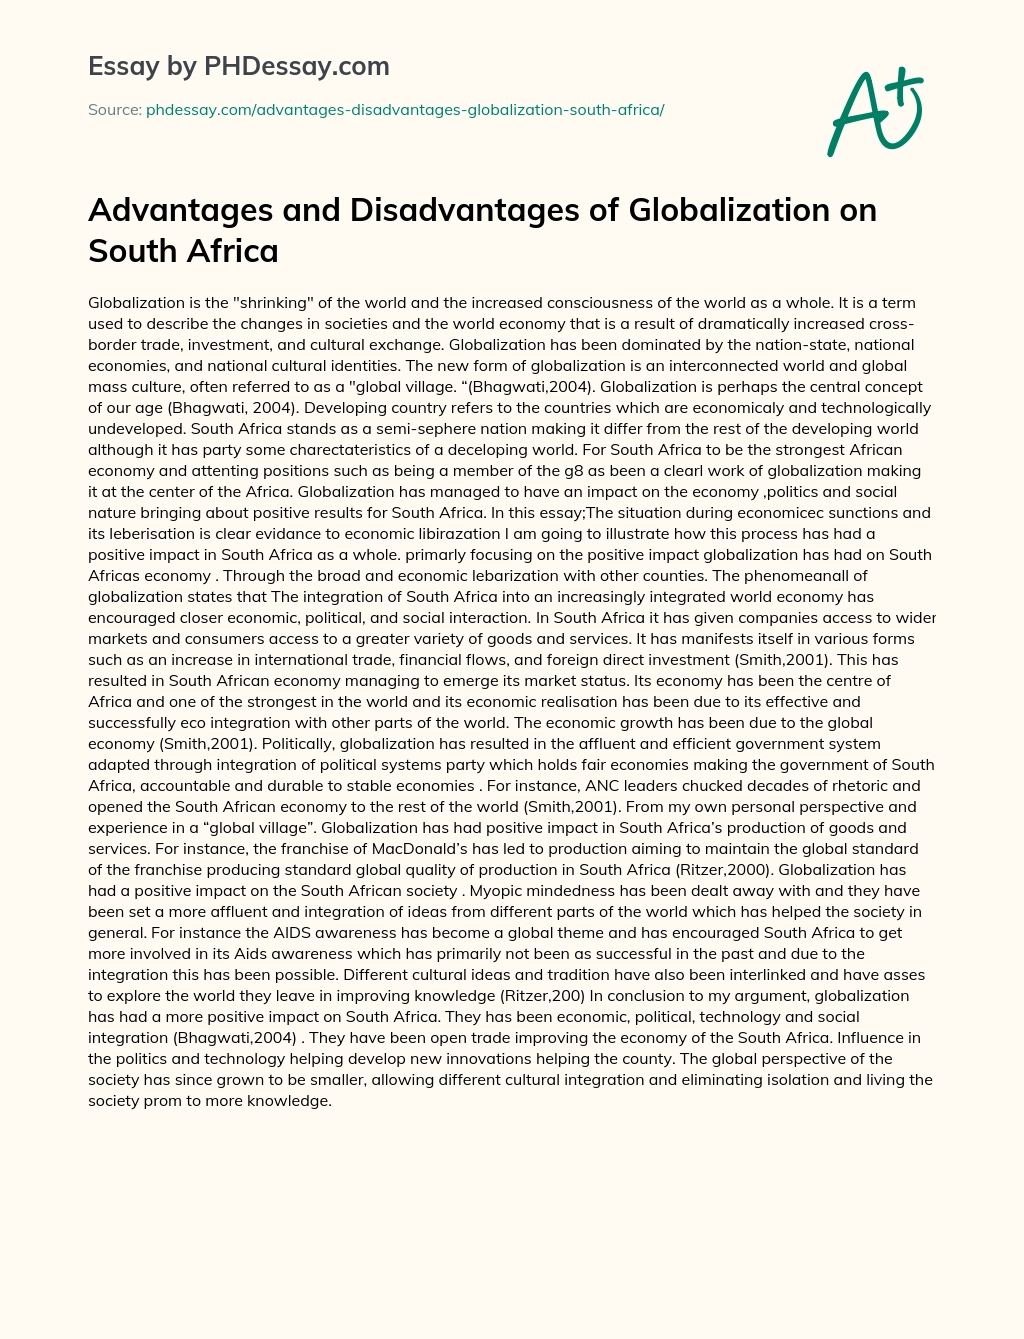 Advantages and Disadvantages of Globalization on South Africa essay